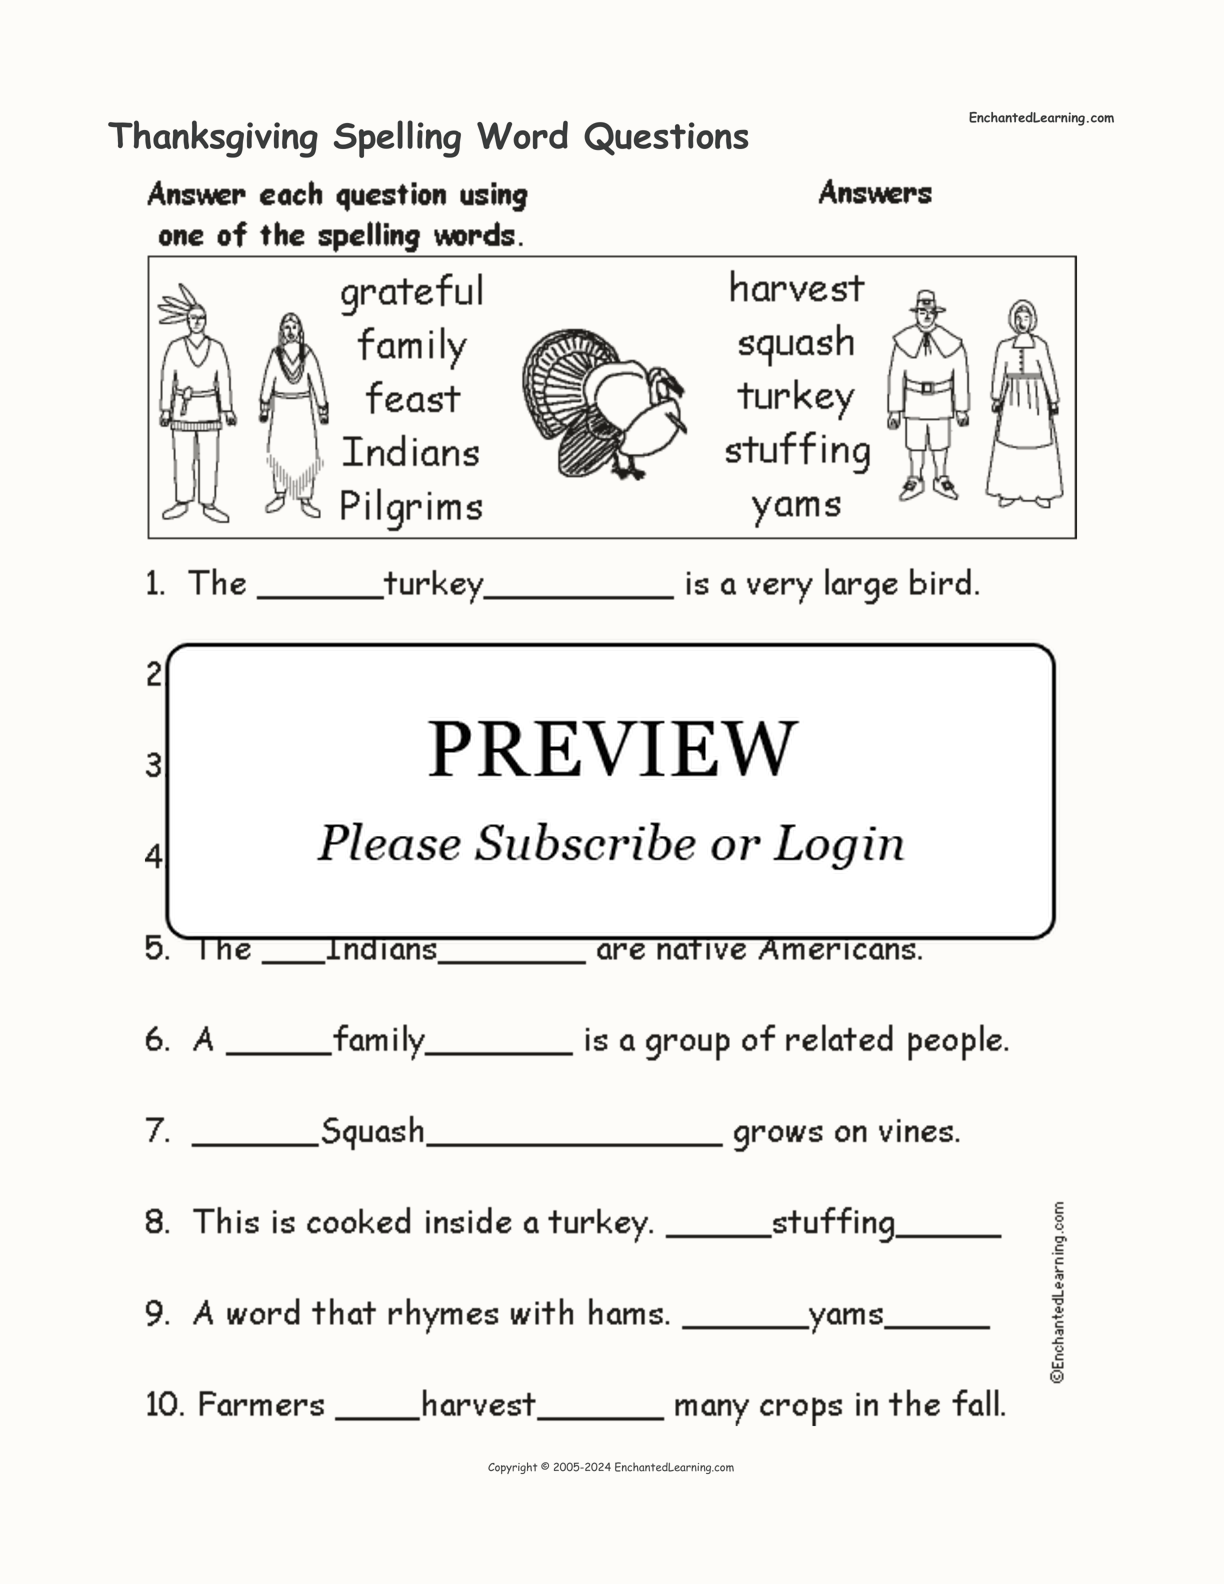 Thanksgiving Spelling Word Questions interactive worksheet page 2